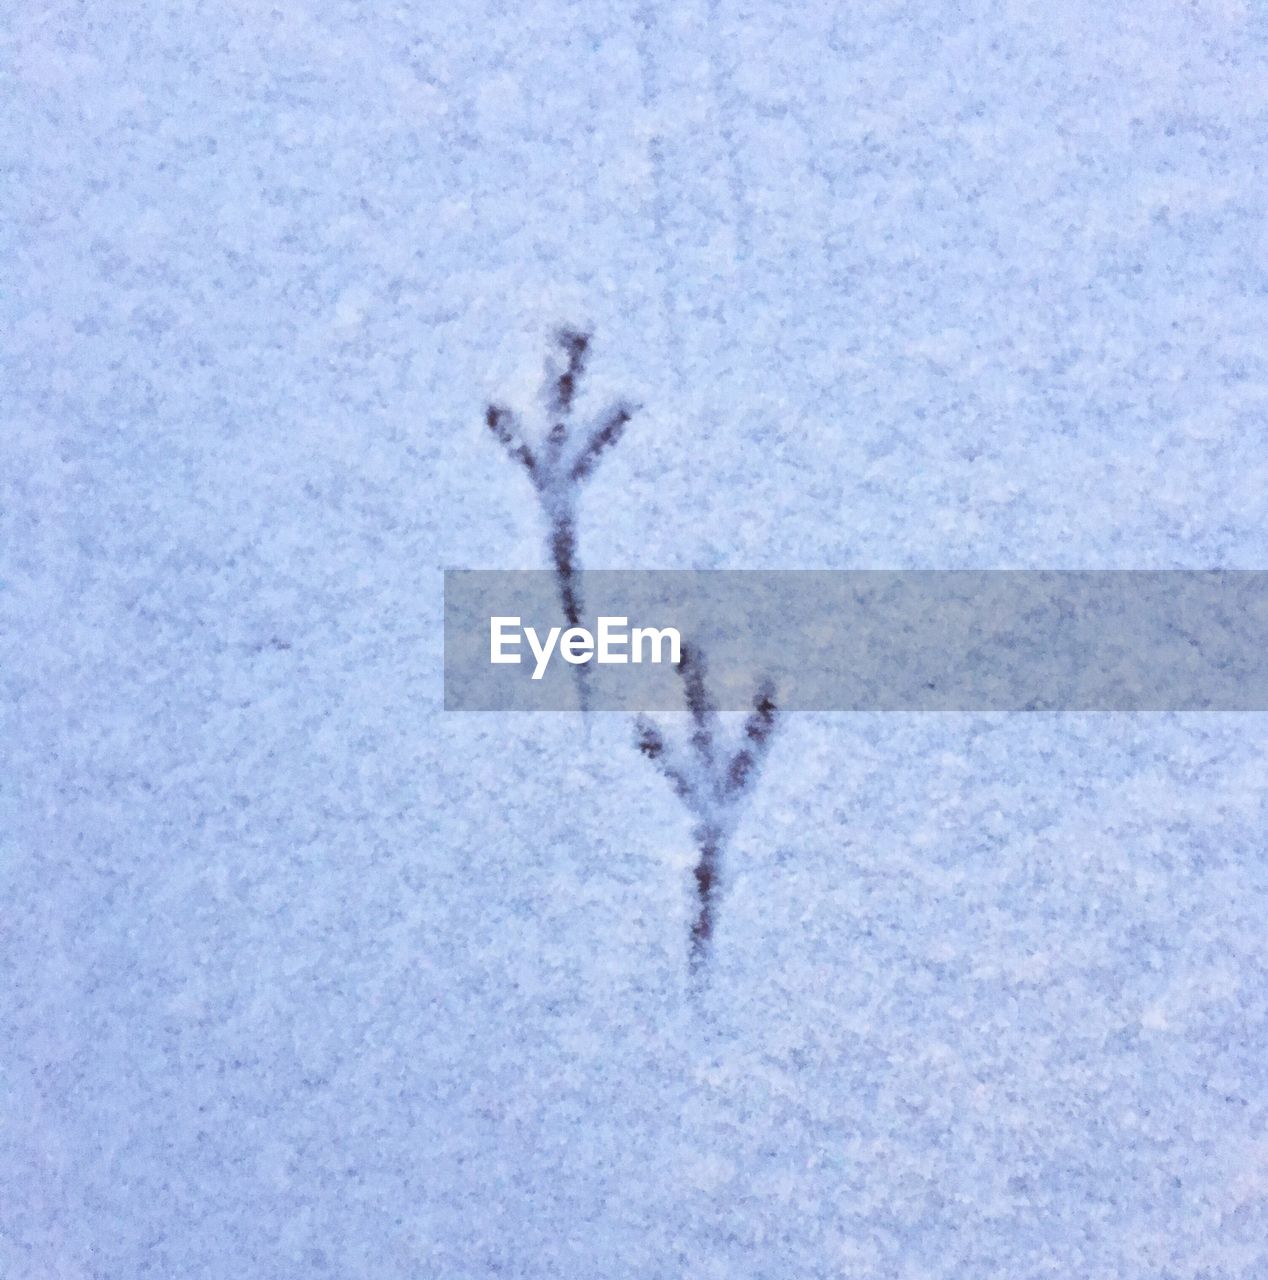 HIGH ANGLE VIEW OF SNOW ON GROUND